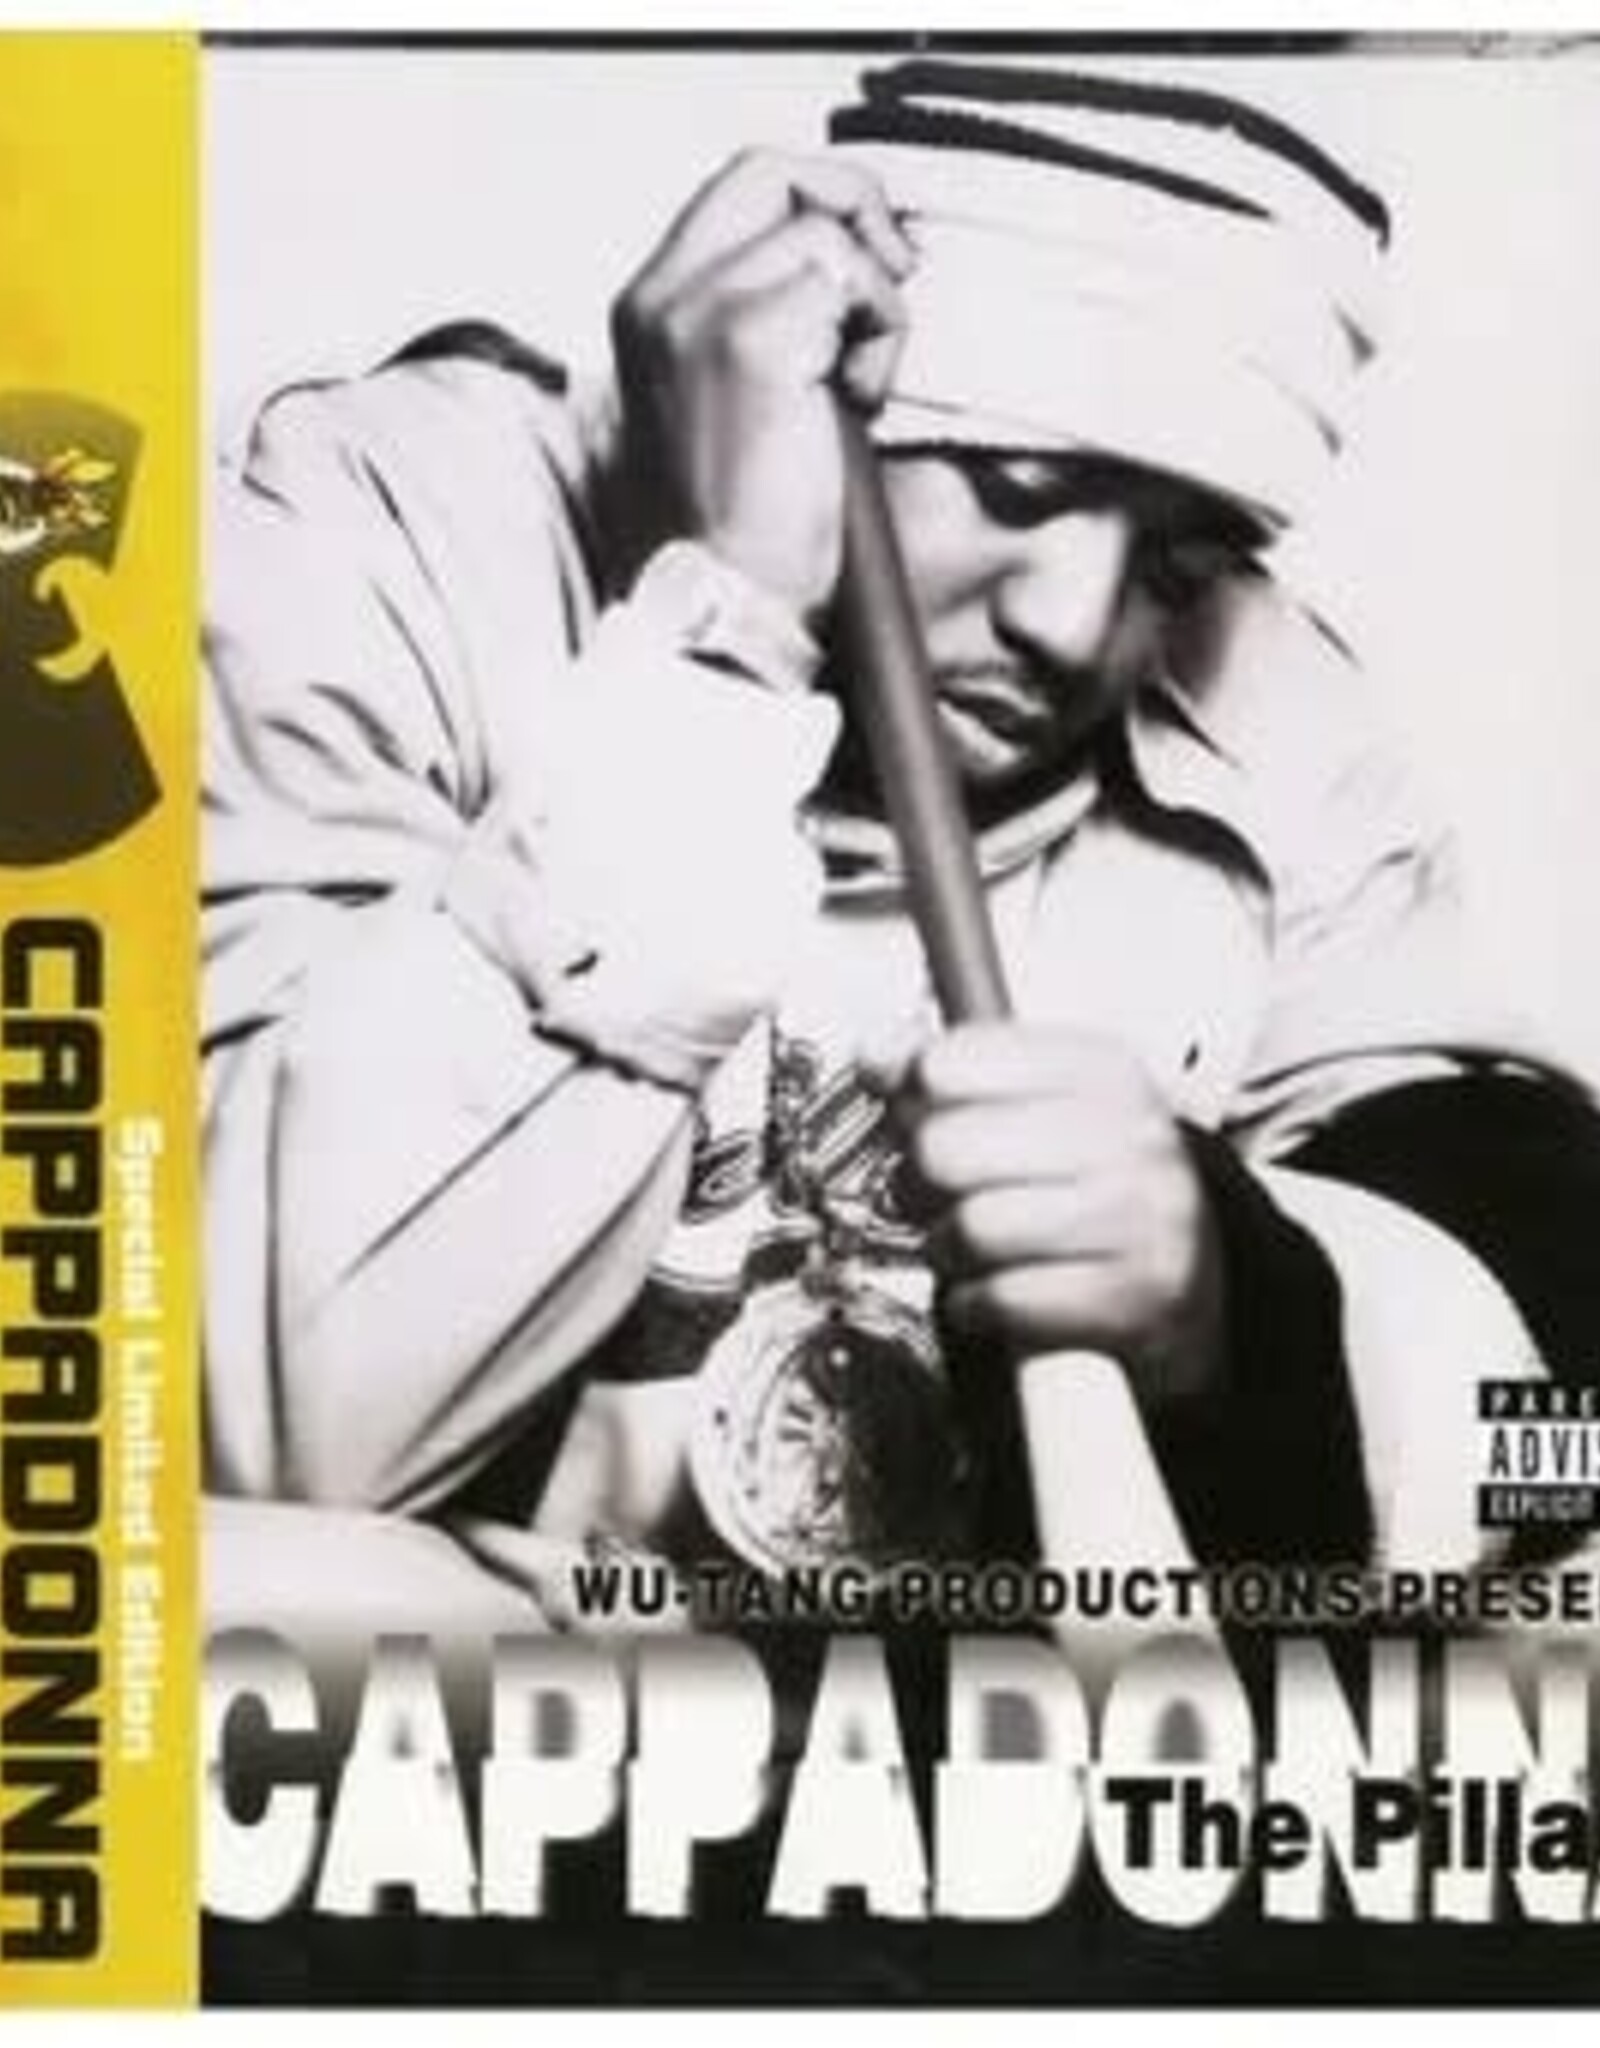 Cappadonna - The Pillage (Limited Edition, Clear Vinyl)